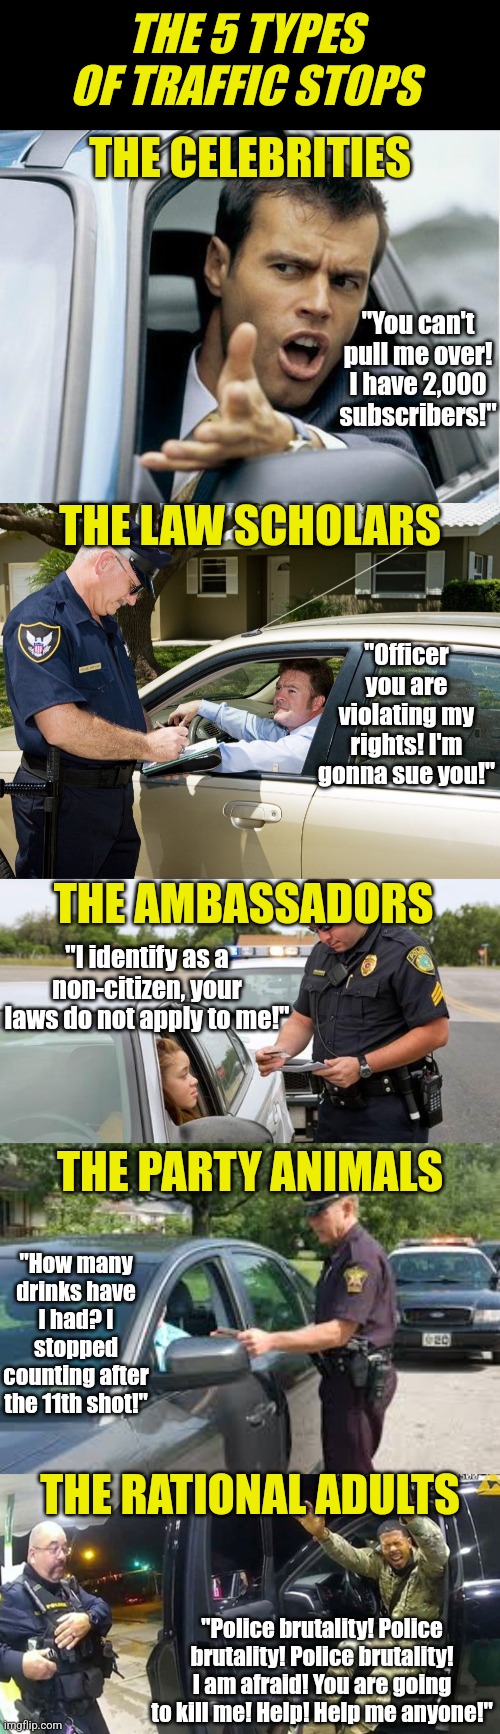 One for the LEOs out there.... | THE 5 TYPES OF TRAFFIC STOPS; THE CELEBRITIES; "You can't pull me over! I have 2,000 subscribers!"; THE LAW SCHOLARS; "Officer you are violating my rights! I'm gonna sue you!"; THE AMBASSADORS; "I identify as a non-citizen, your laws do not apply to me!"; THE PARTY ANIMALS; "How many drinks have I had? I stopped counting after the 11th shot!"; THE RATIONAL ADULTS; "Police brutality! Police brutality! Police brutality! I am afraid! You are going to kill me! Help! Help me anyone!" | image tagged in cop,police,traffic stop,pepper sprayed,crazy,bad drivers | made w/ Imgflip meme maker